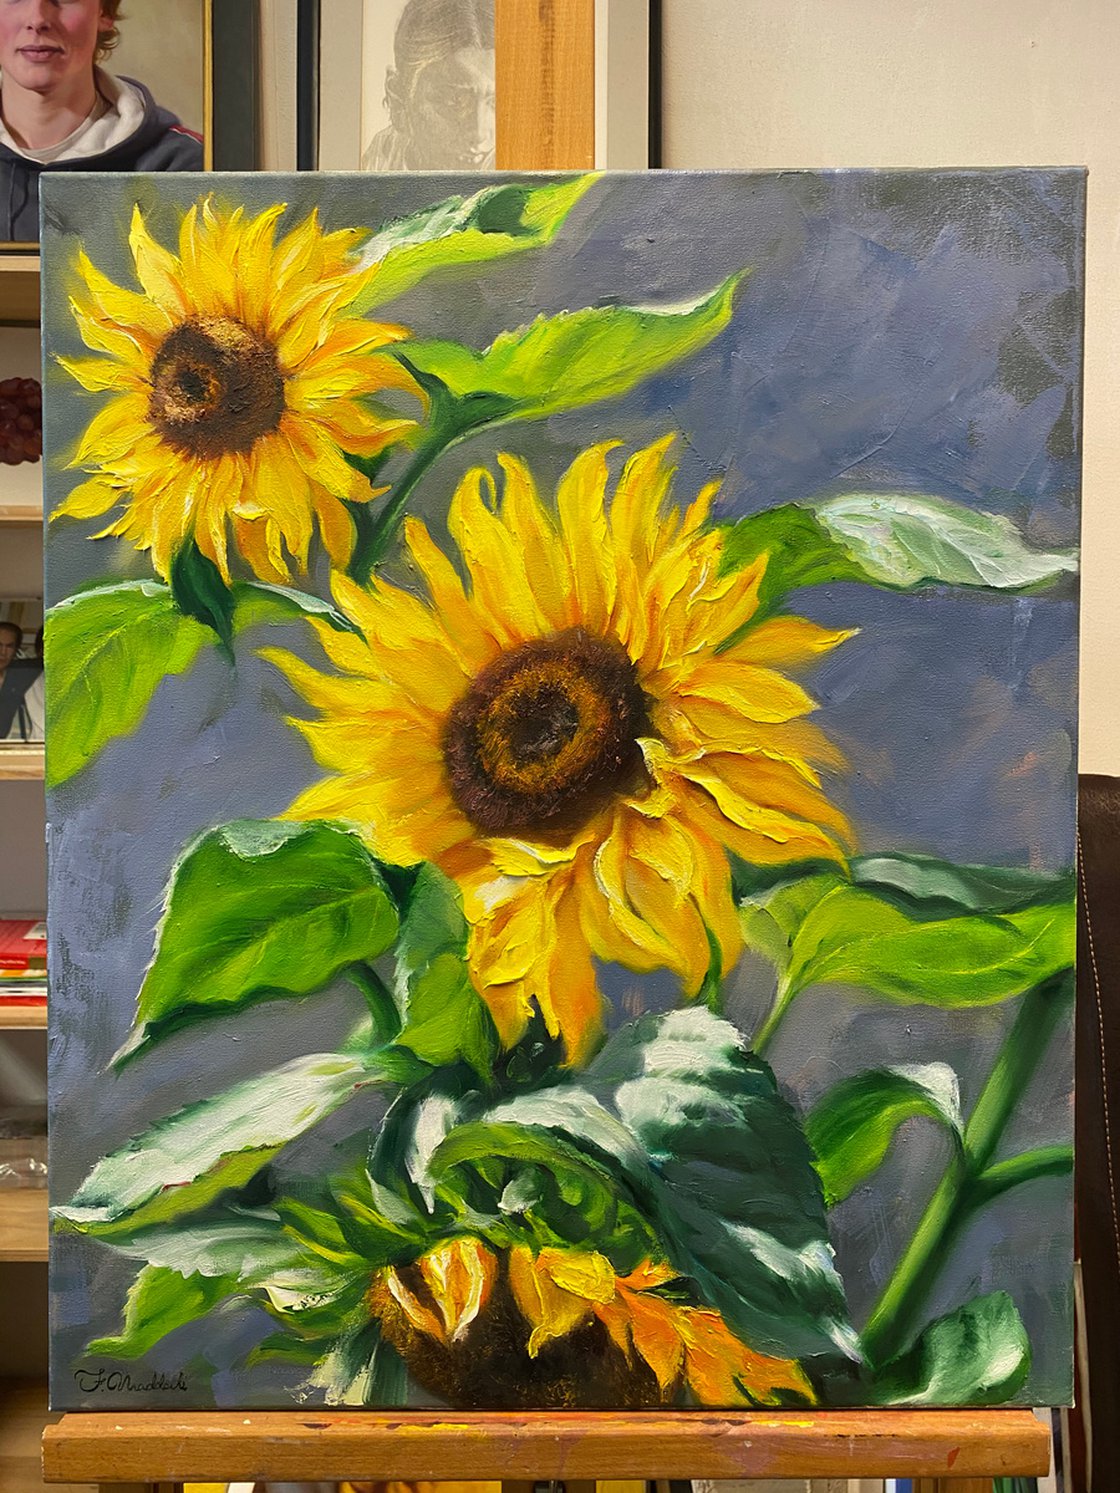 Sunflower Oil painting by Farzaneh Maddahi | Artfinder